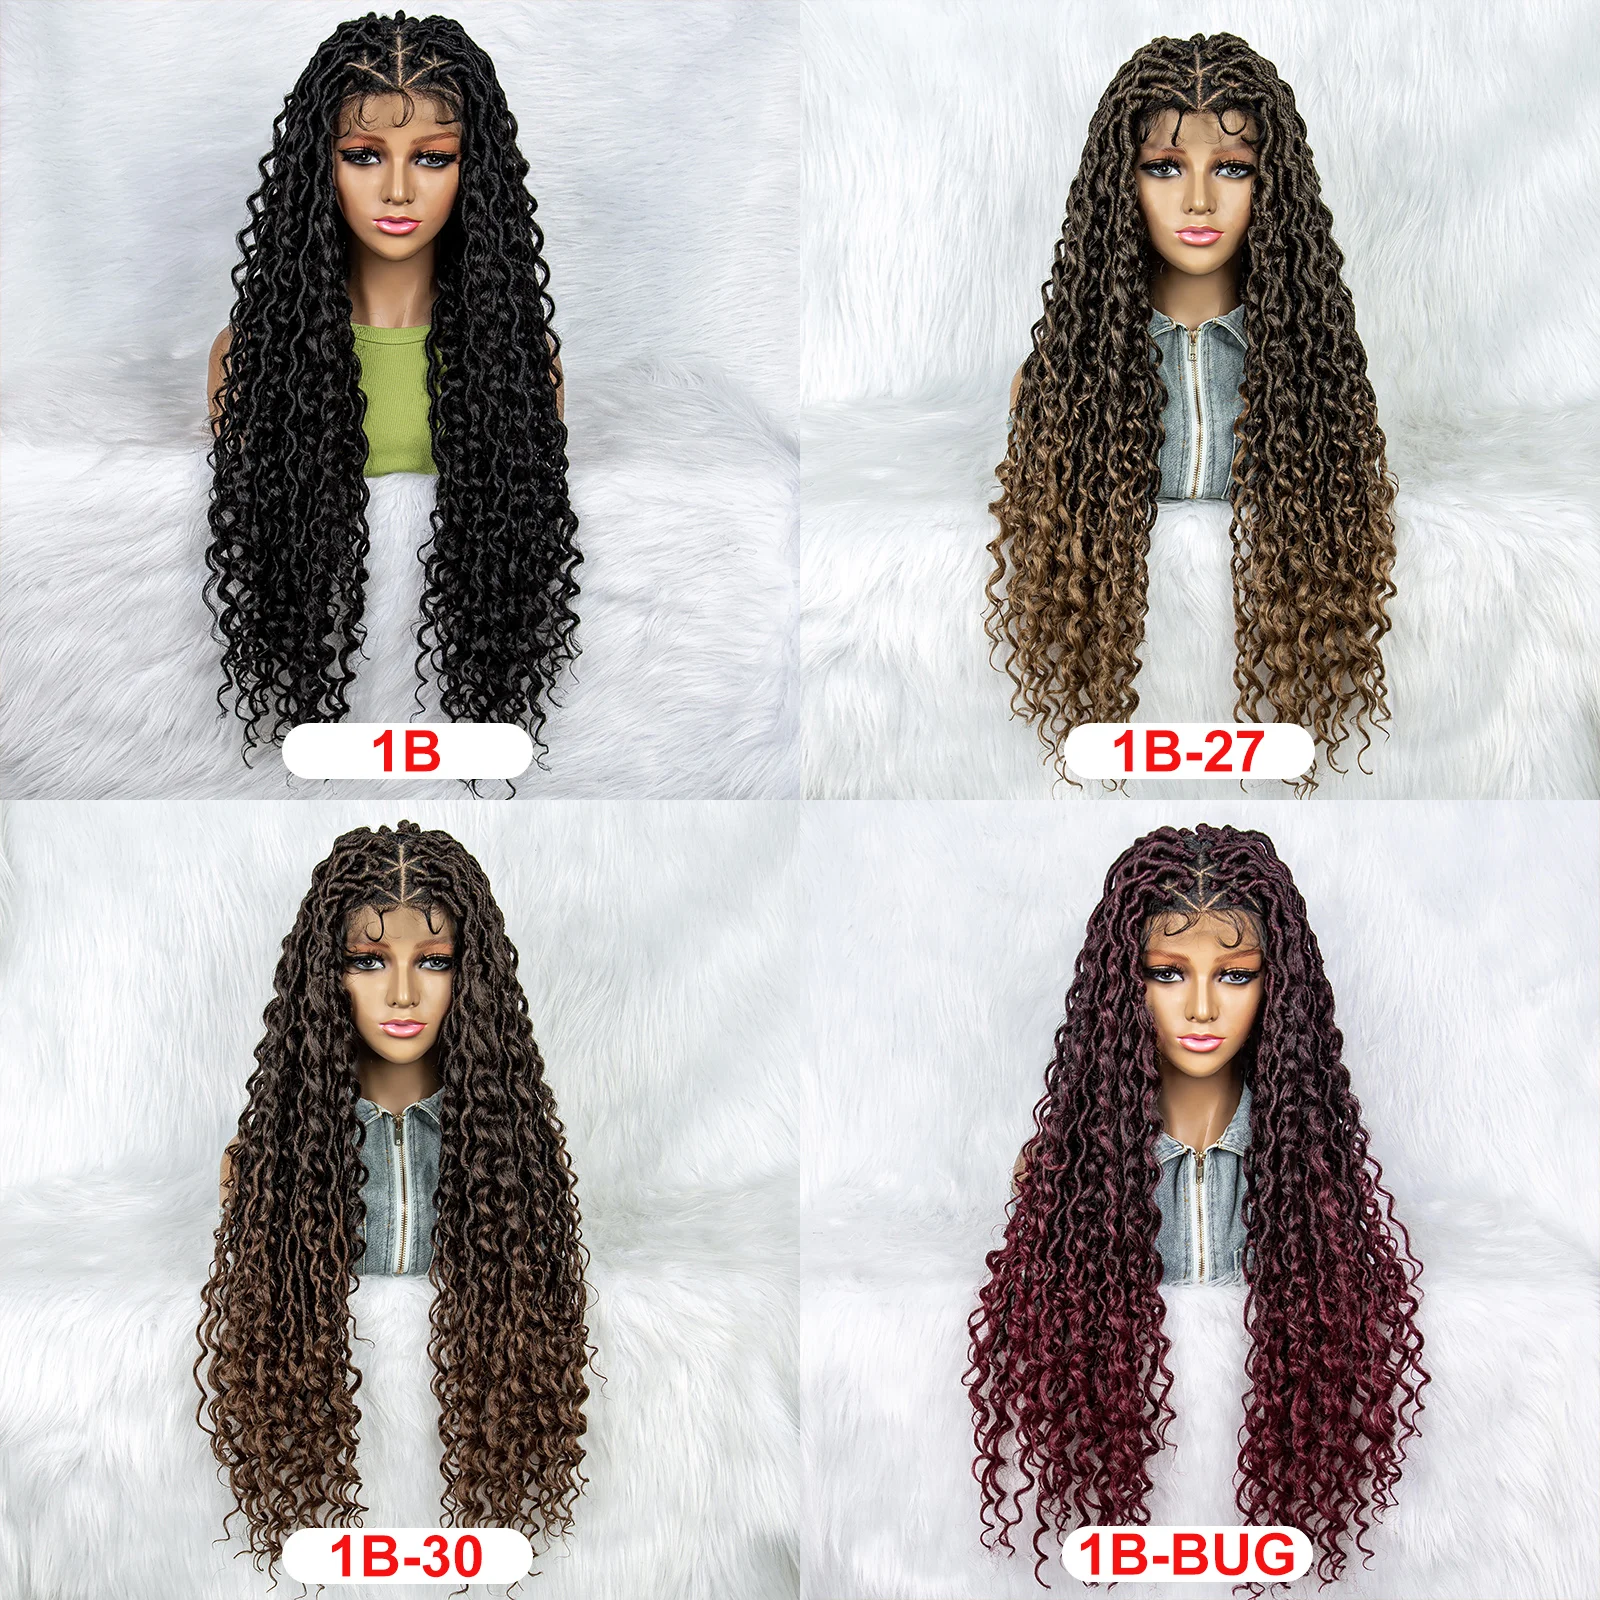 Synthetic Full Lace Wig Braided Wigs For Black Women Knotless Box Wig Braid Braiding Hair Water Wave Wavy Braids Wigs images - 6